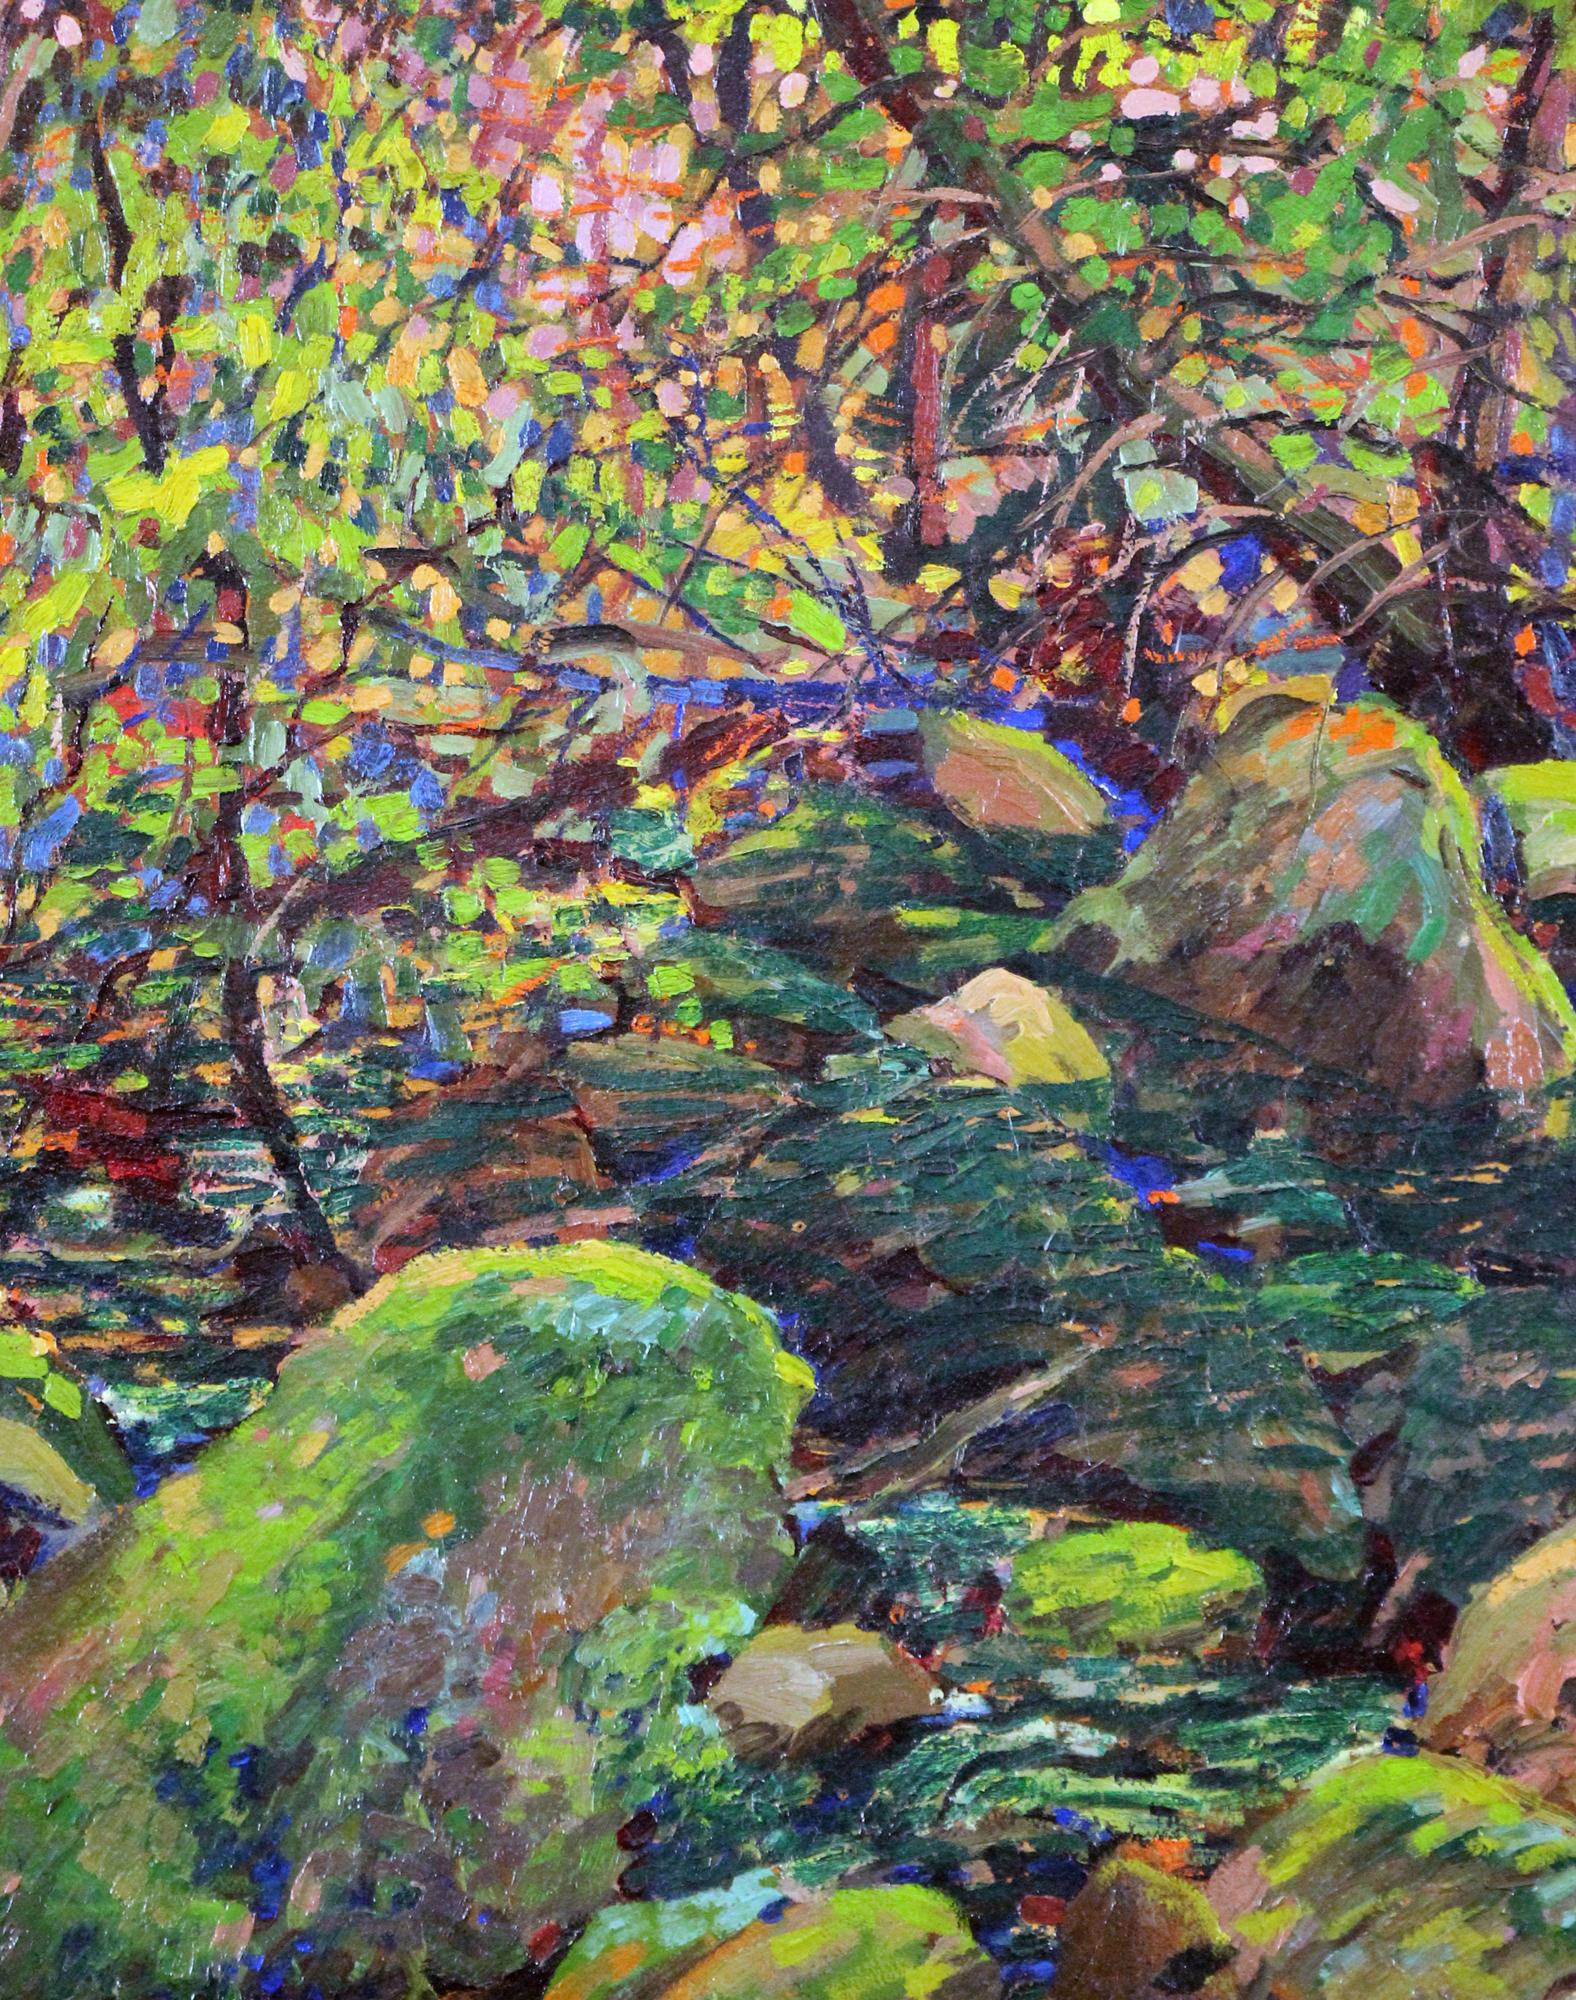 Stream with Rocks, American Impressionist Summer Landscape, Oil on Board